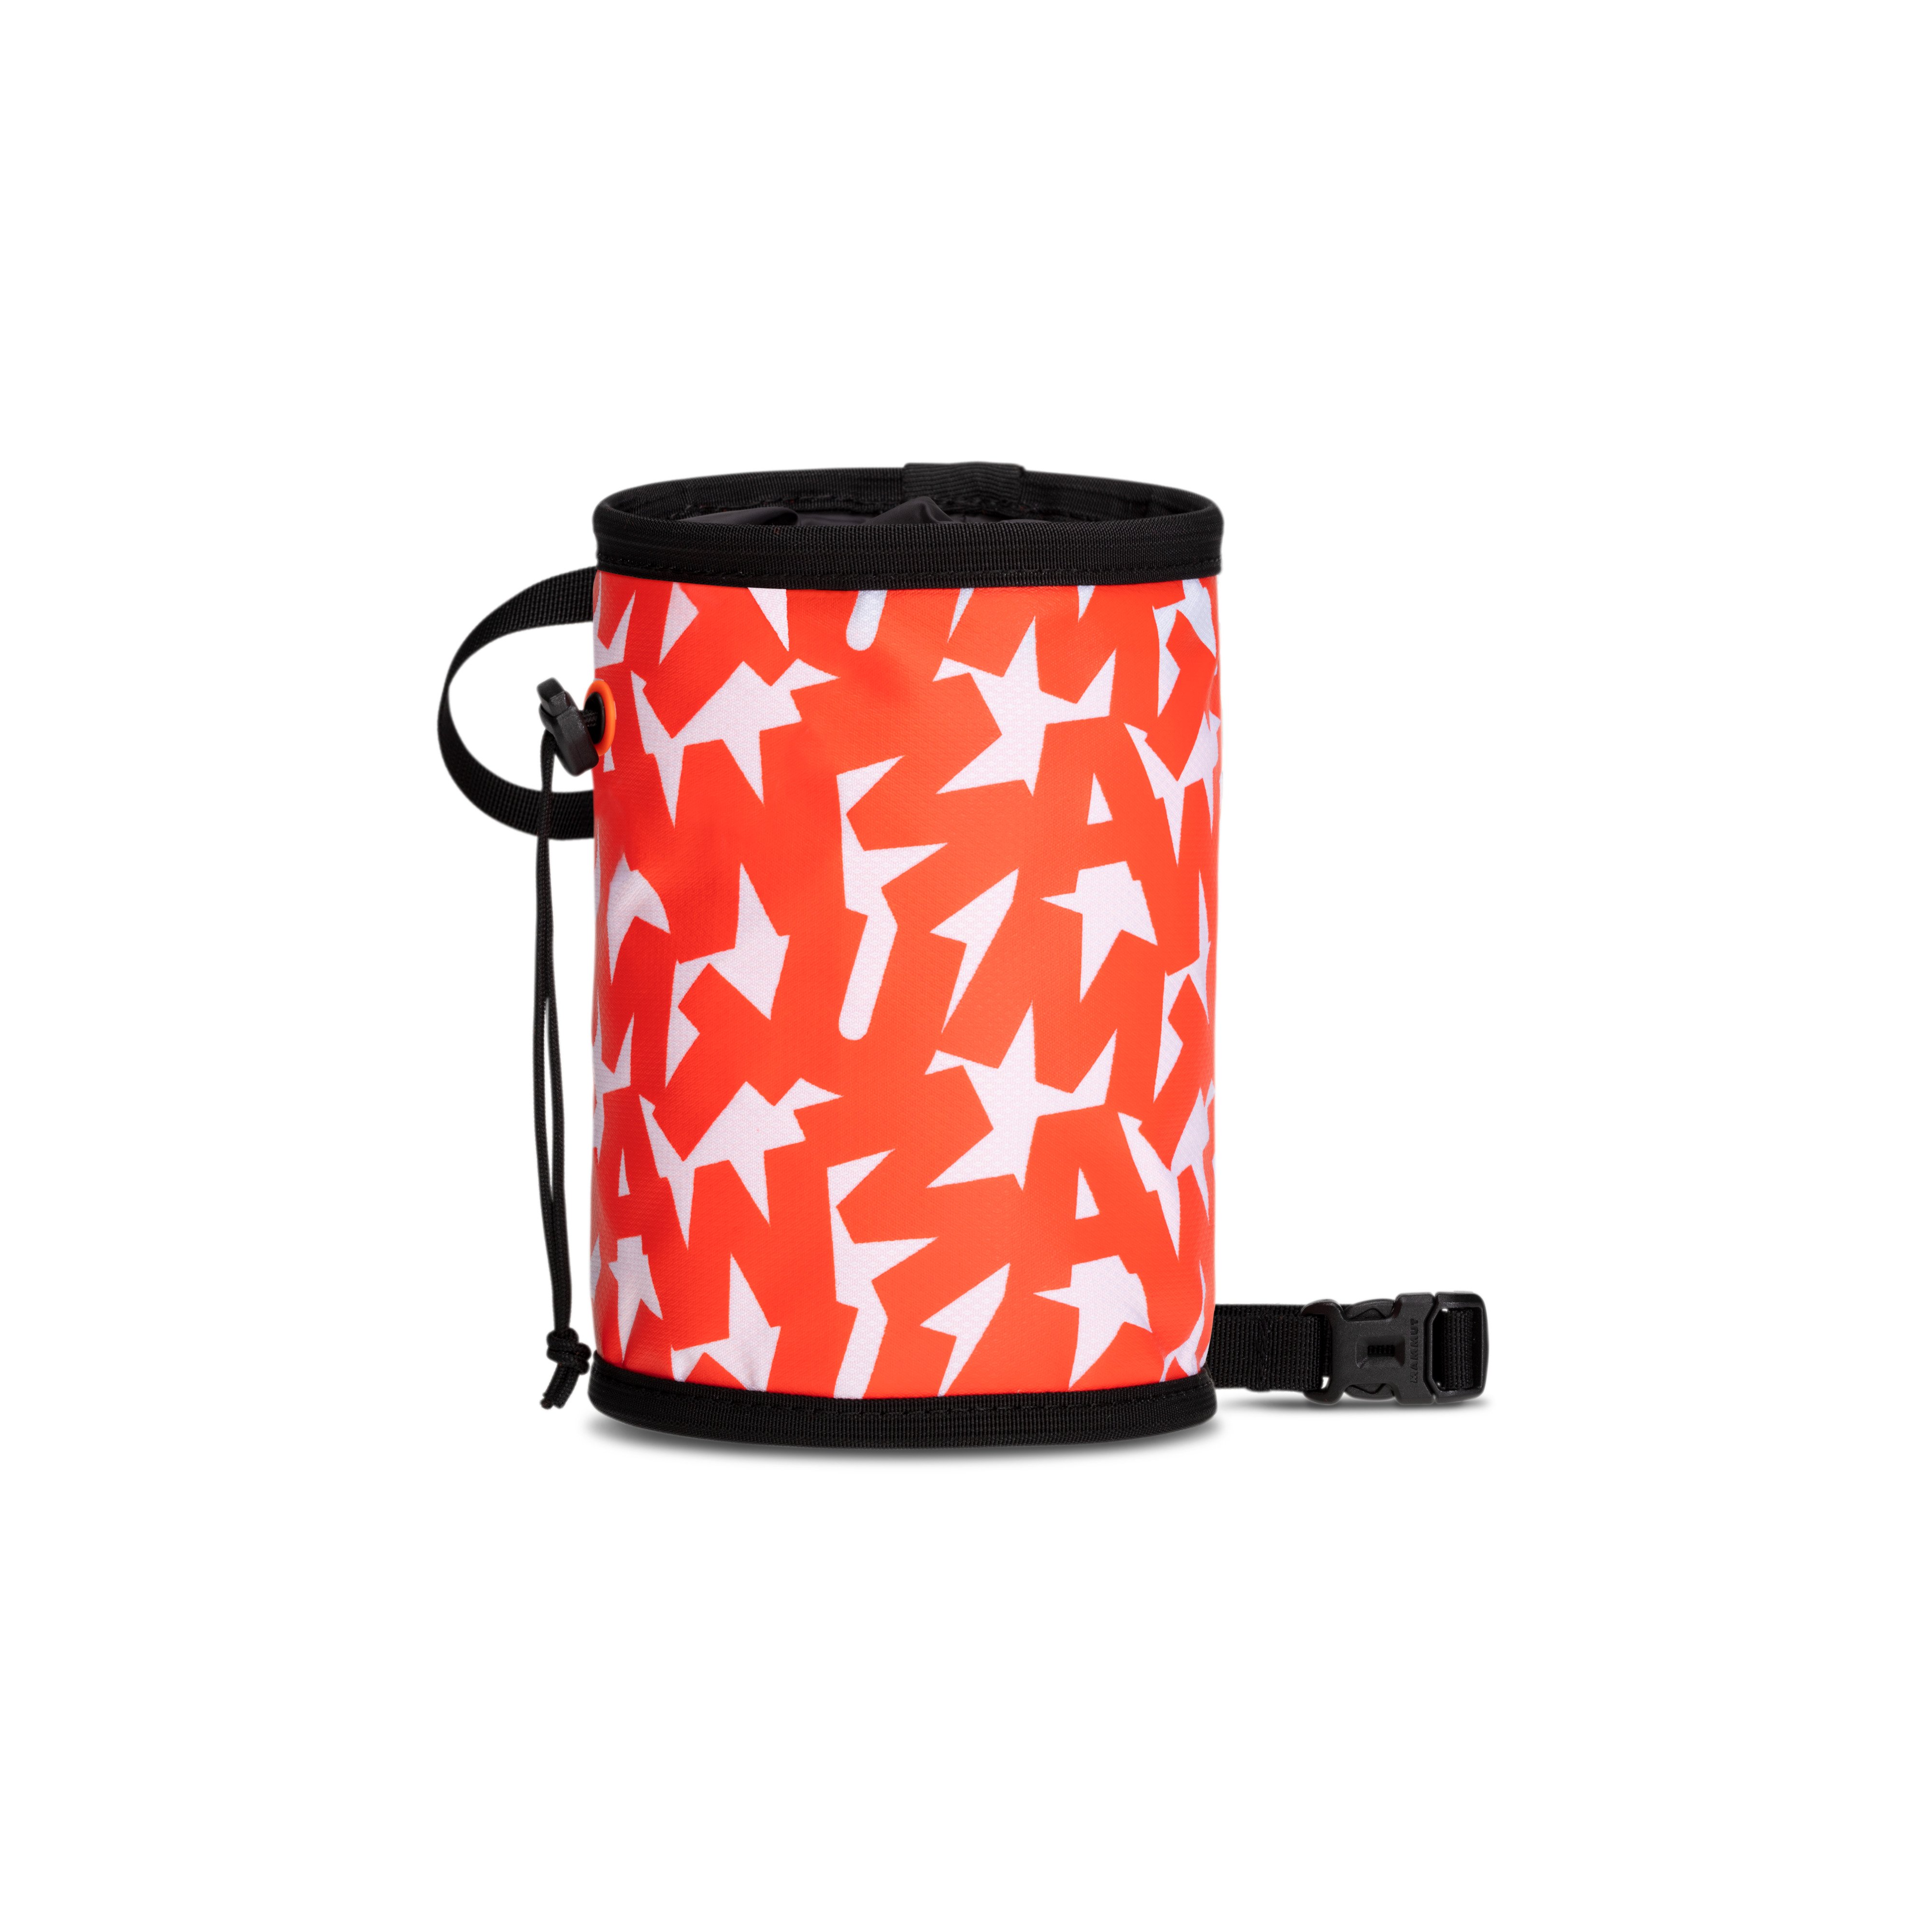 Gym Print Chalk Bag - hot red AOP, one size product image